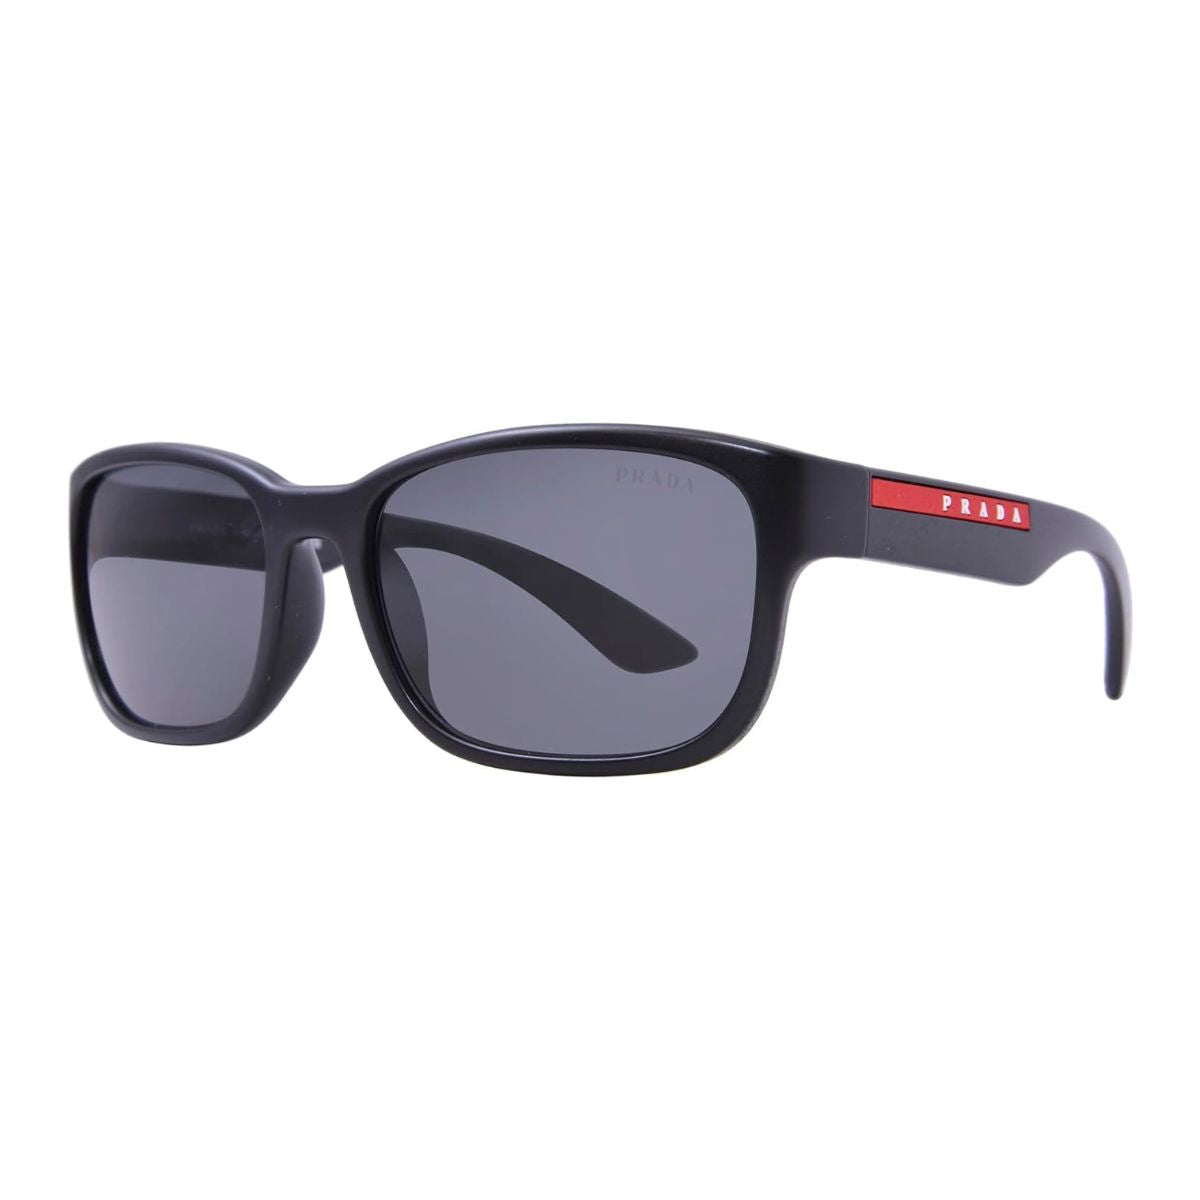 "Discover sophistication with Prada SpS05V 1BO-5S0 sunglasses, featuring a stylish square grey frame for men. Find the best sunglasses for men at Optorium."